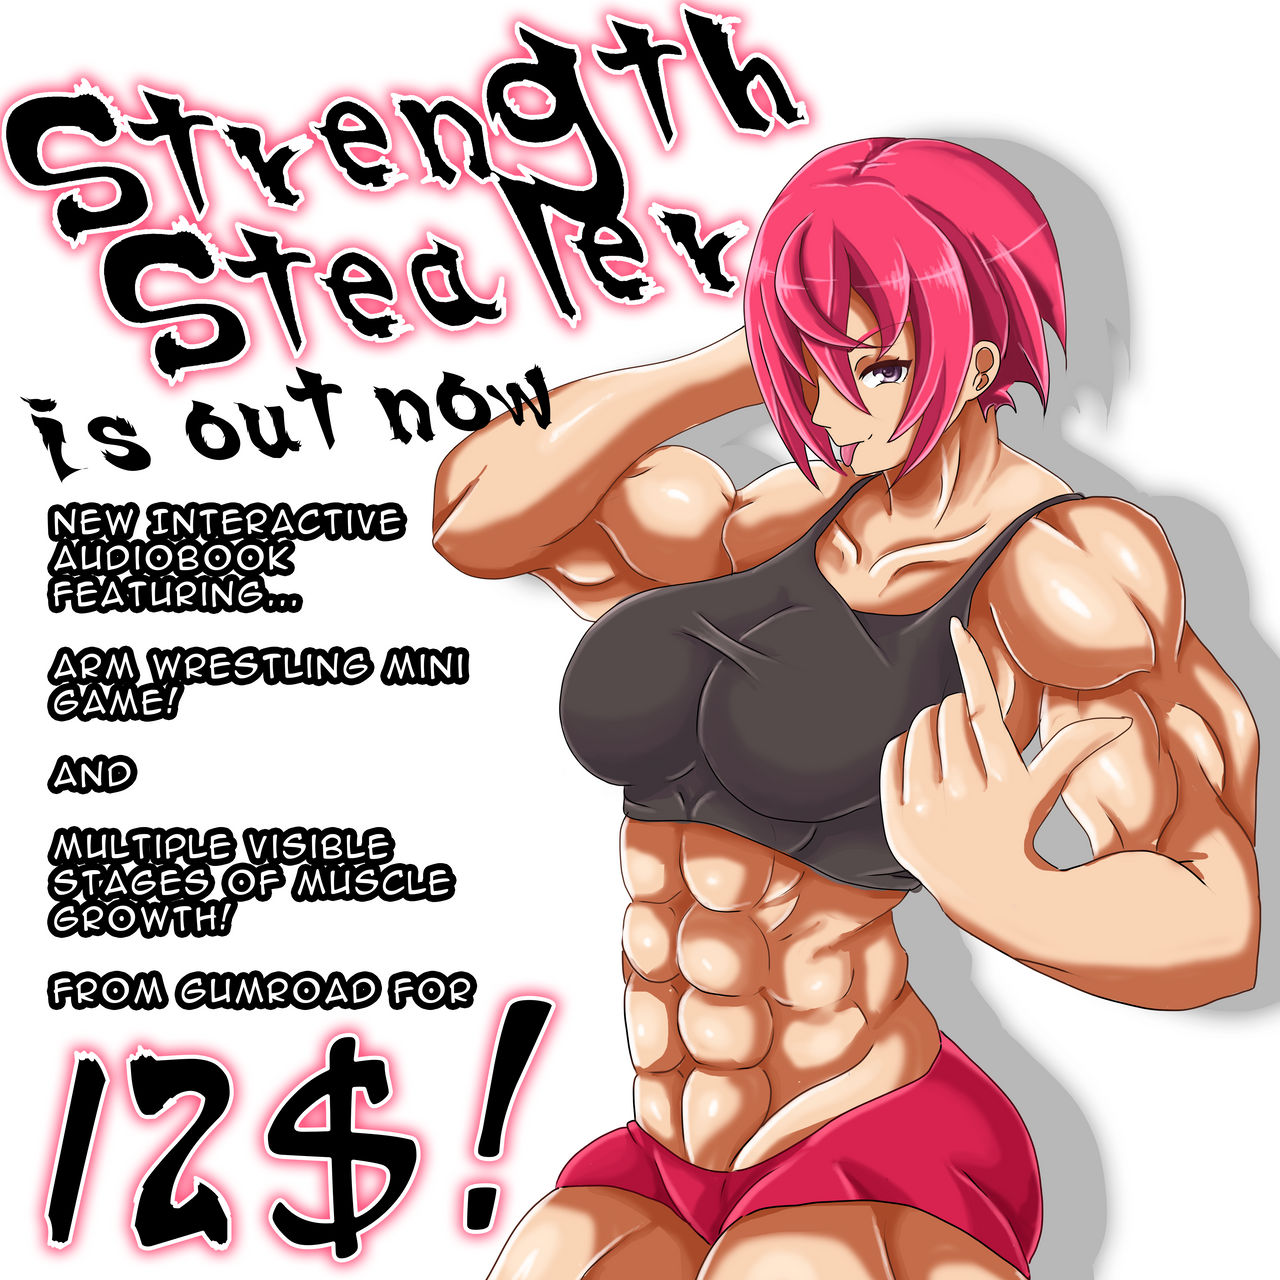 female muscle growth games